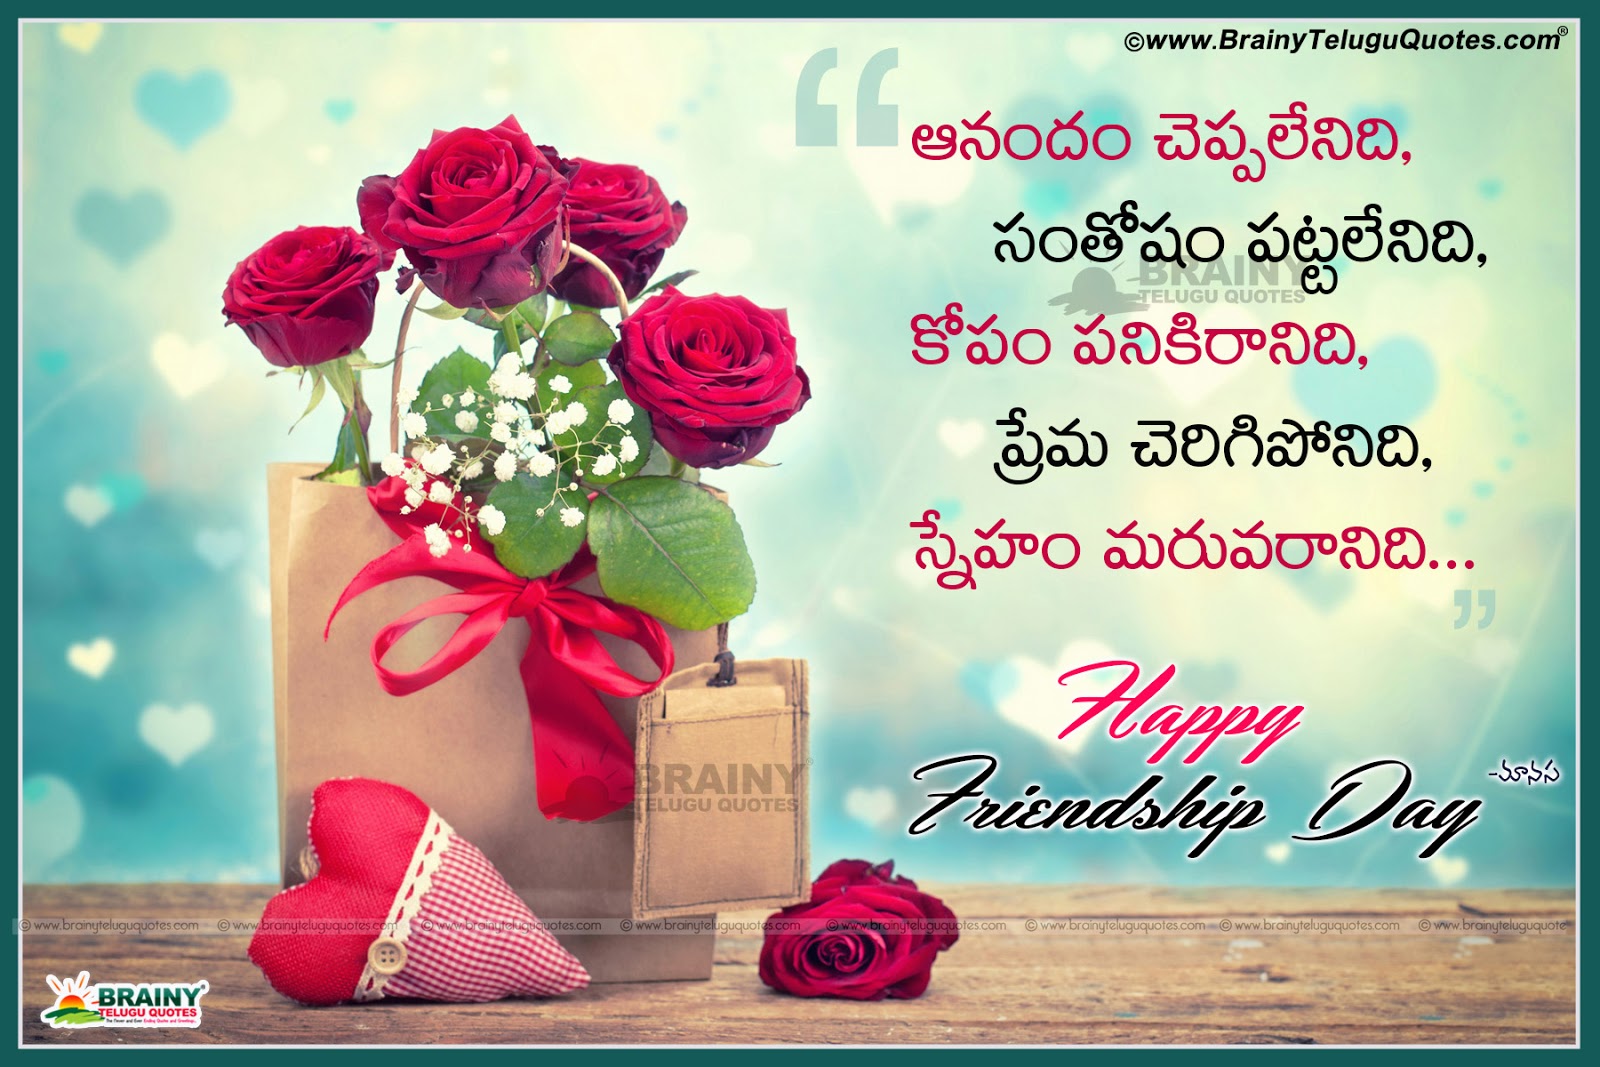 Friendship day quotes greetings wallpapers images in telugu ...